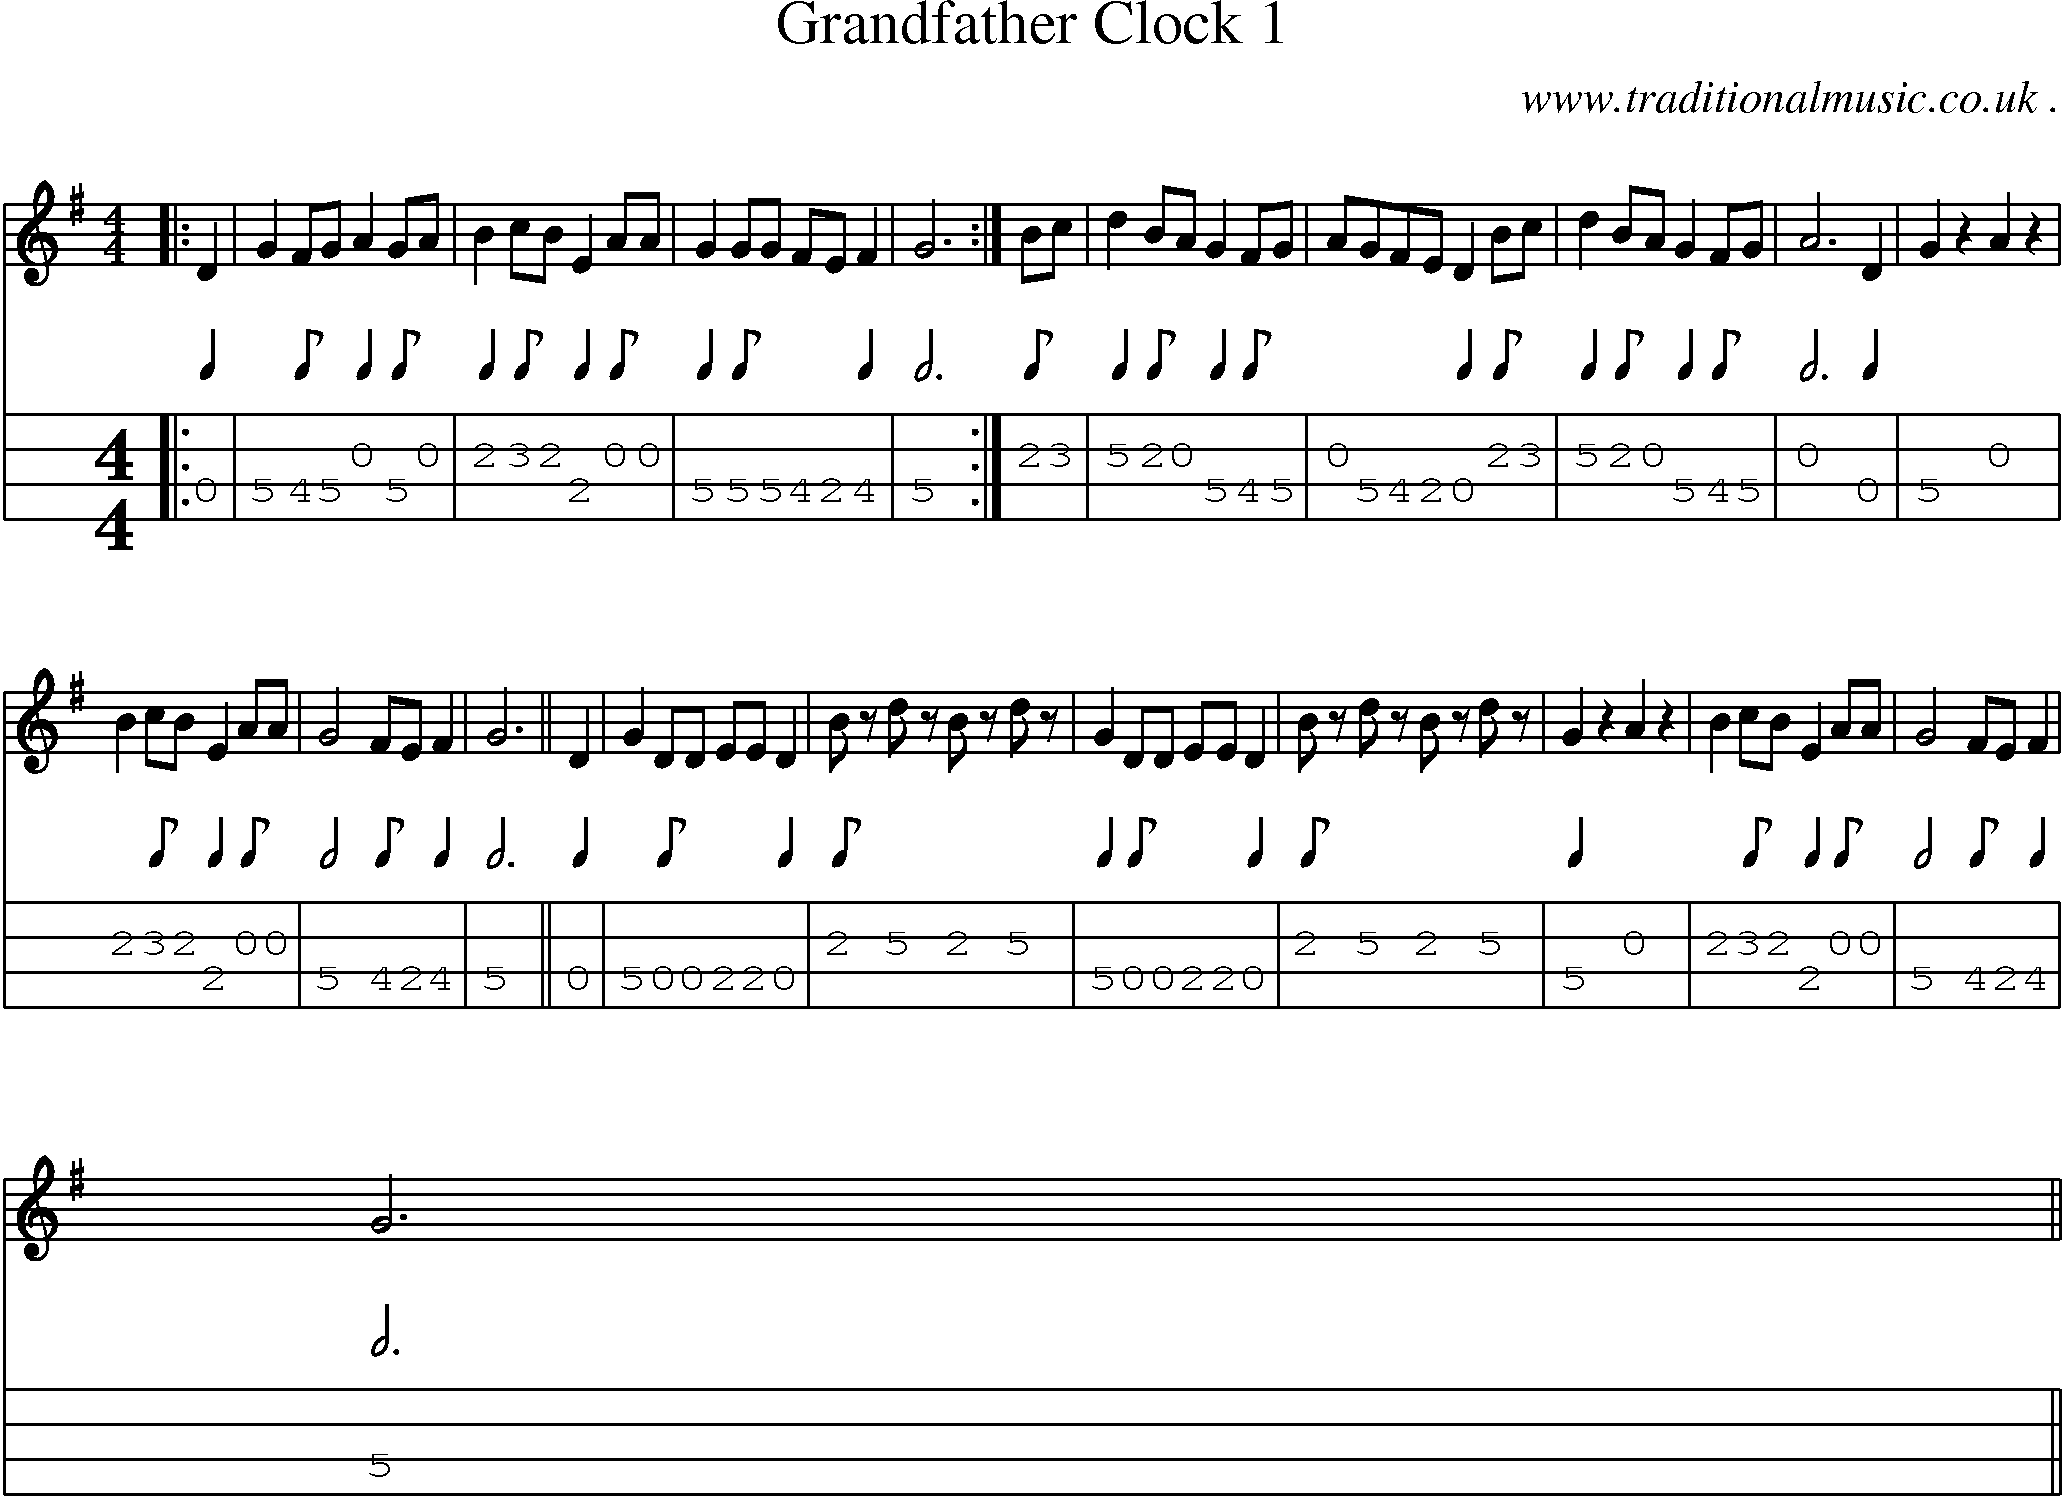 Music Score and Mandolin Tabs for Grandfather Clock 1